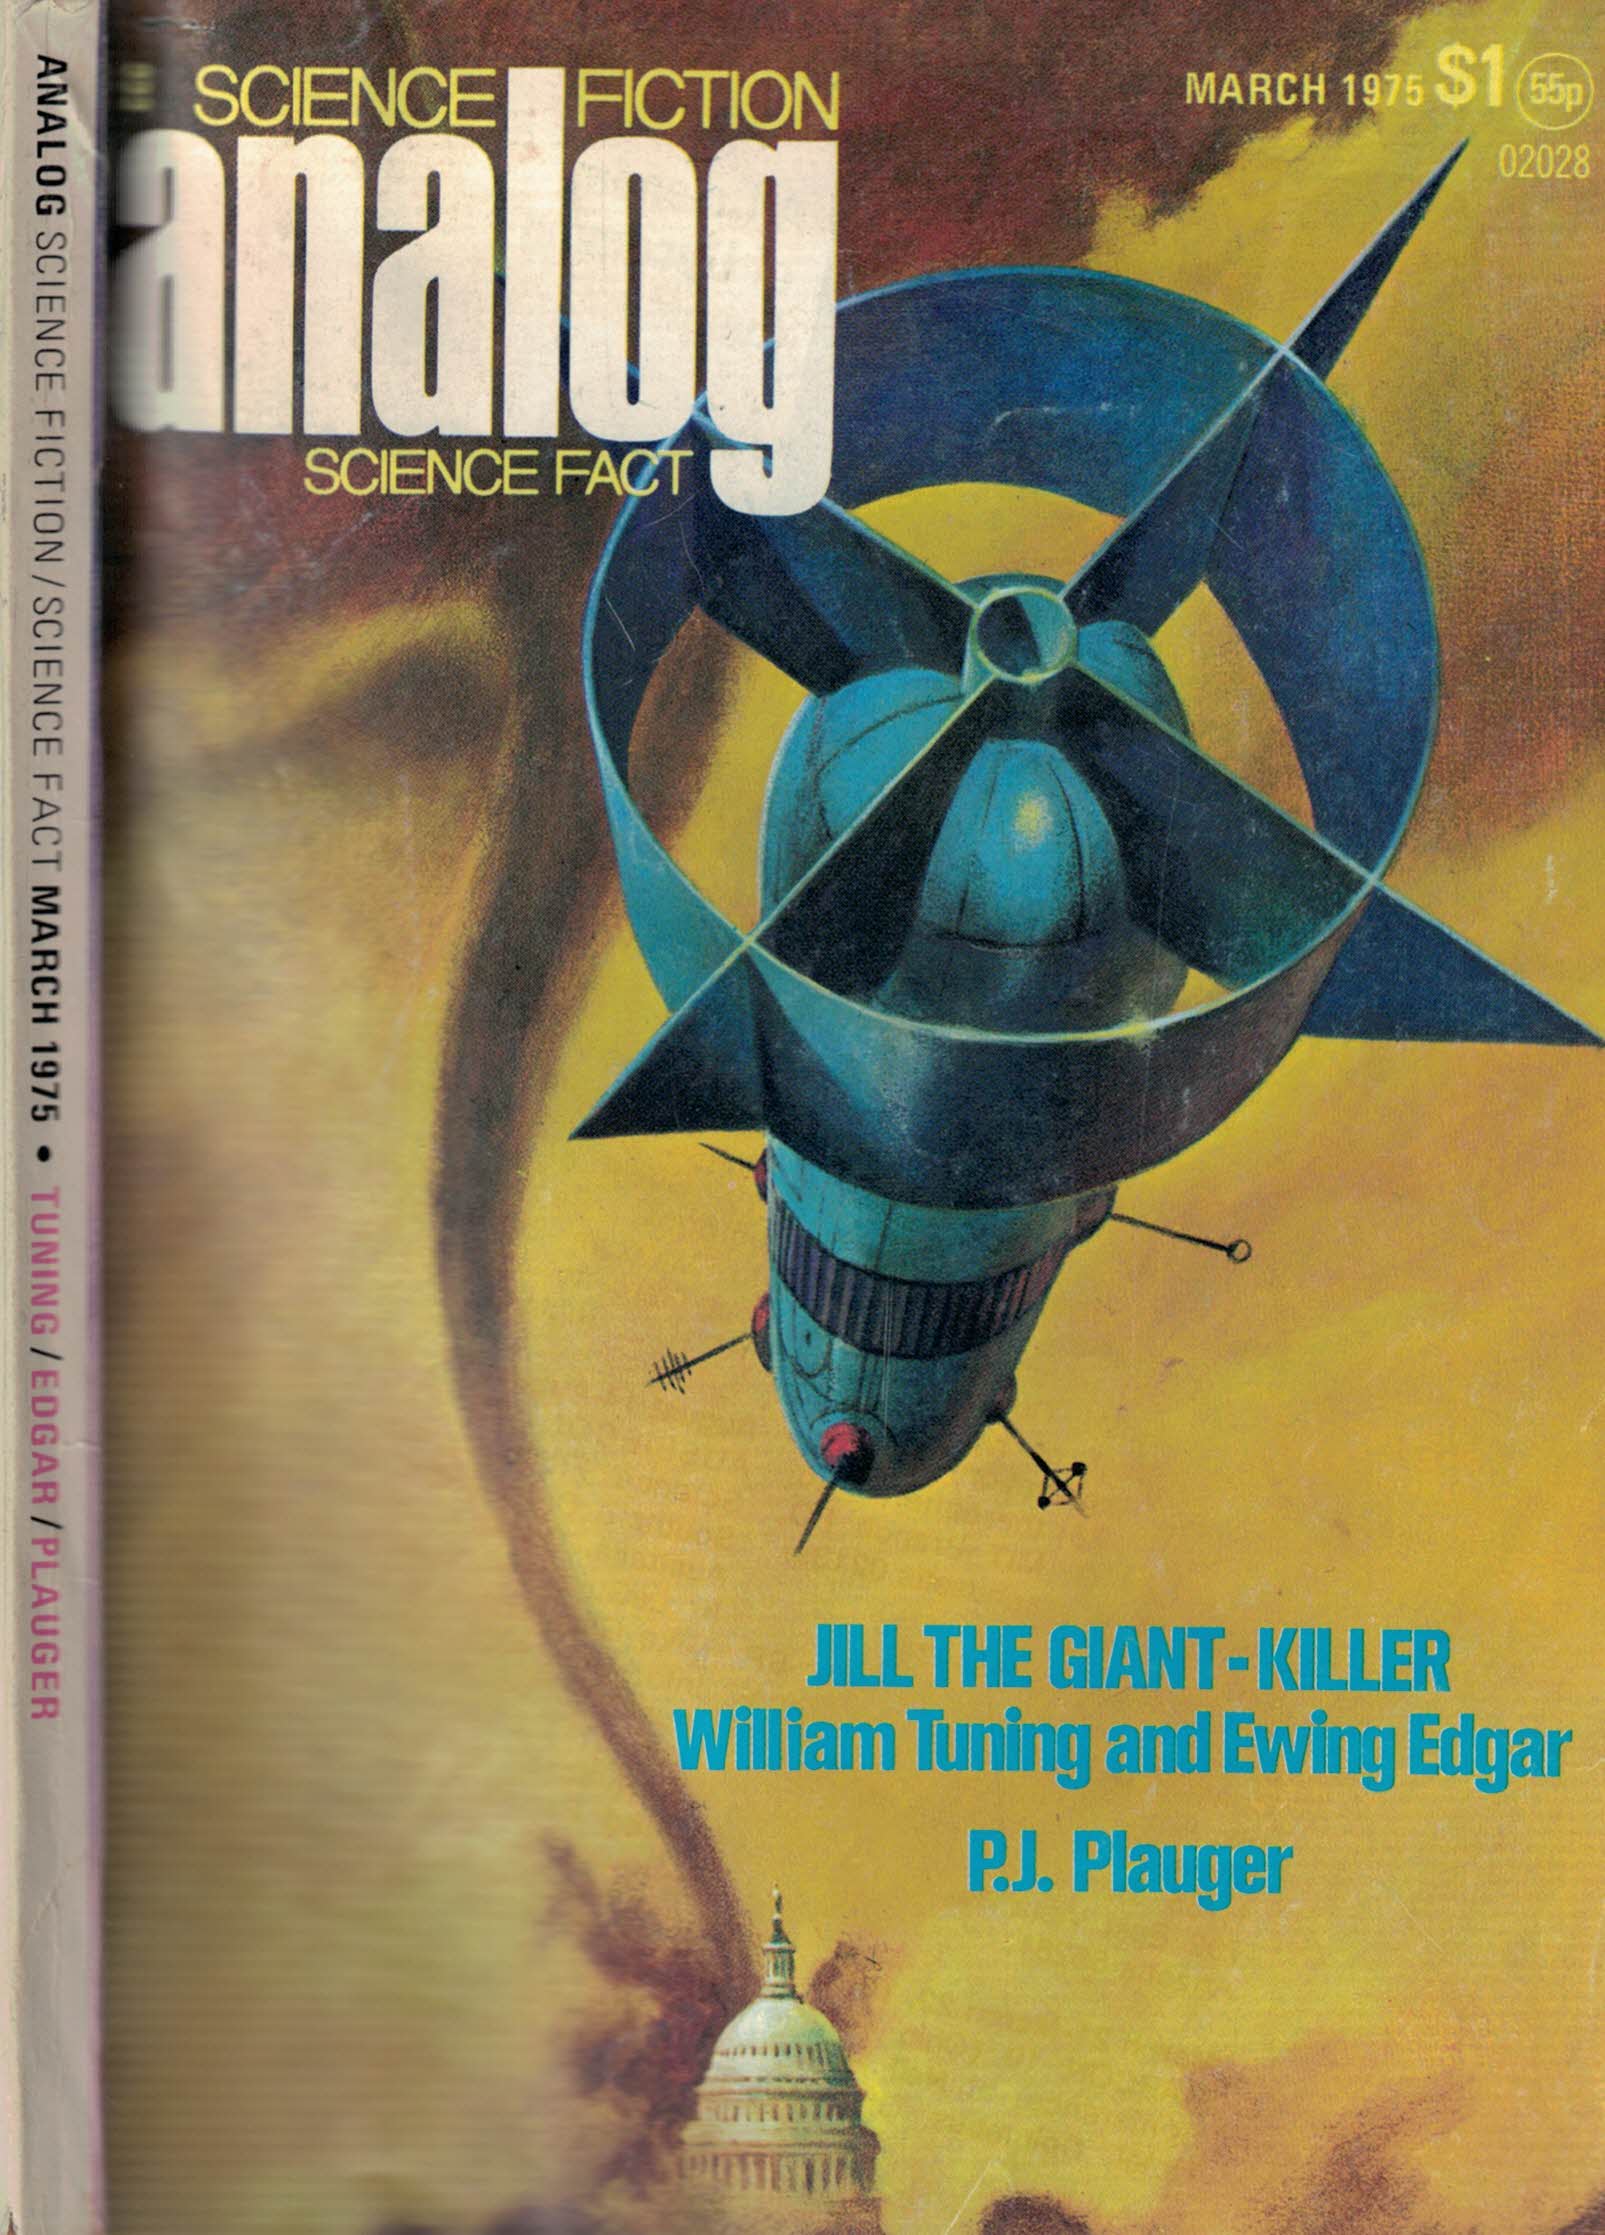 Analog. Science Fiction and Fact. Volume 95, Number 3. March 1975.